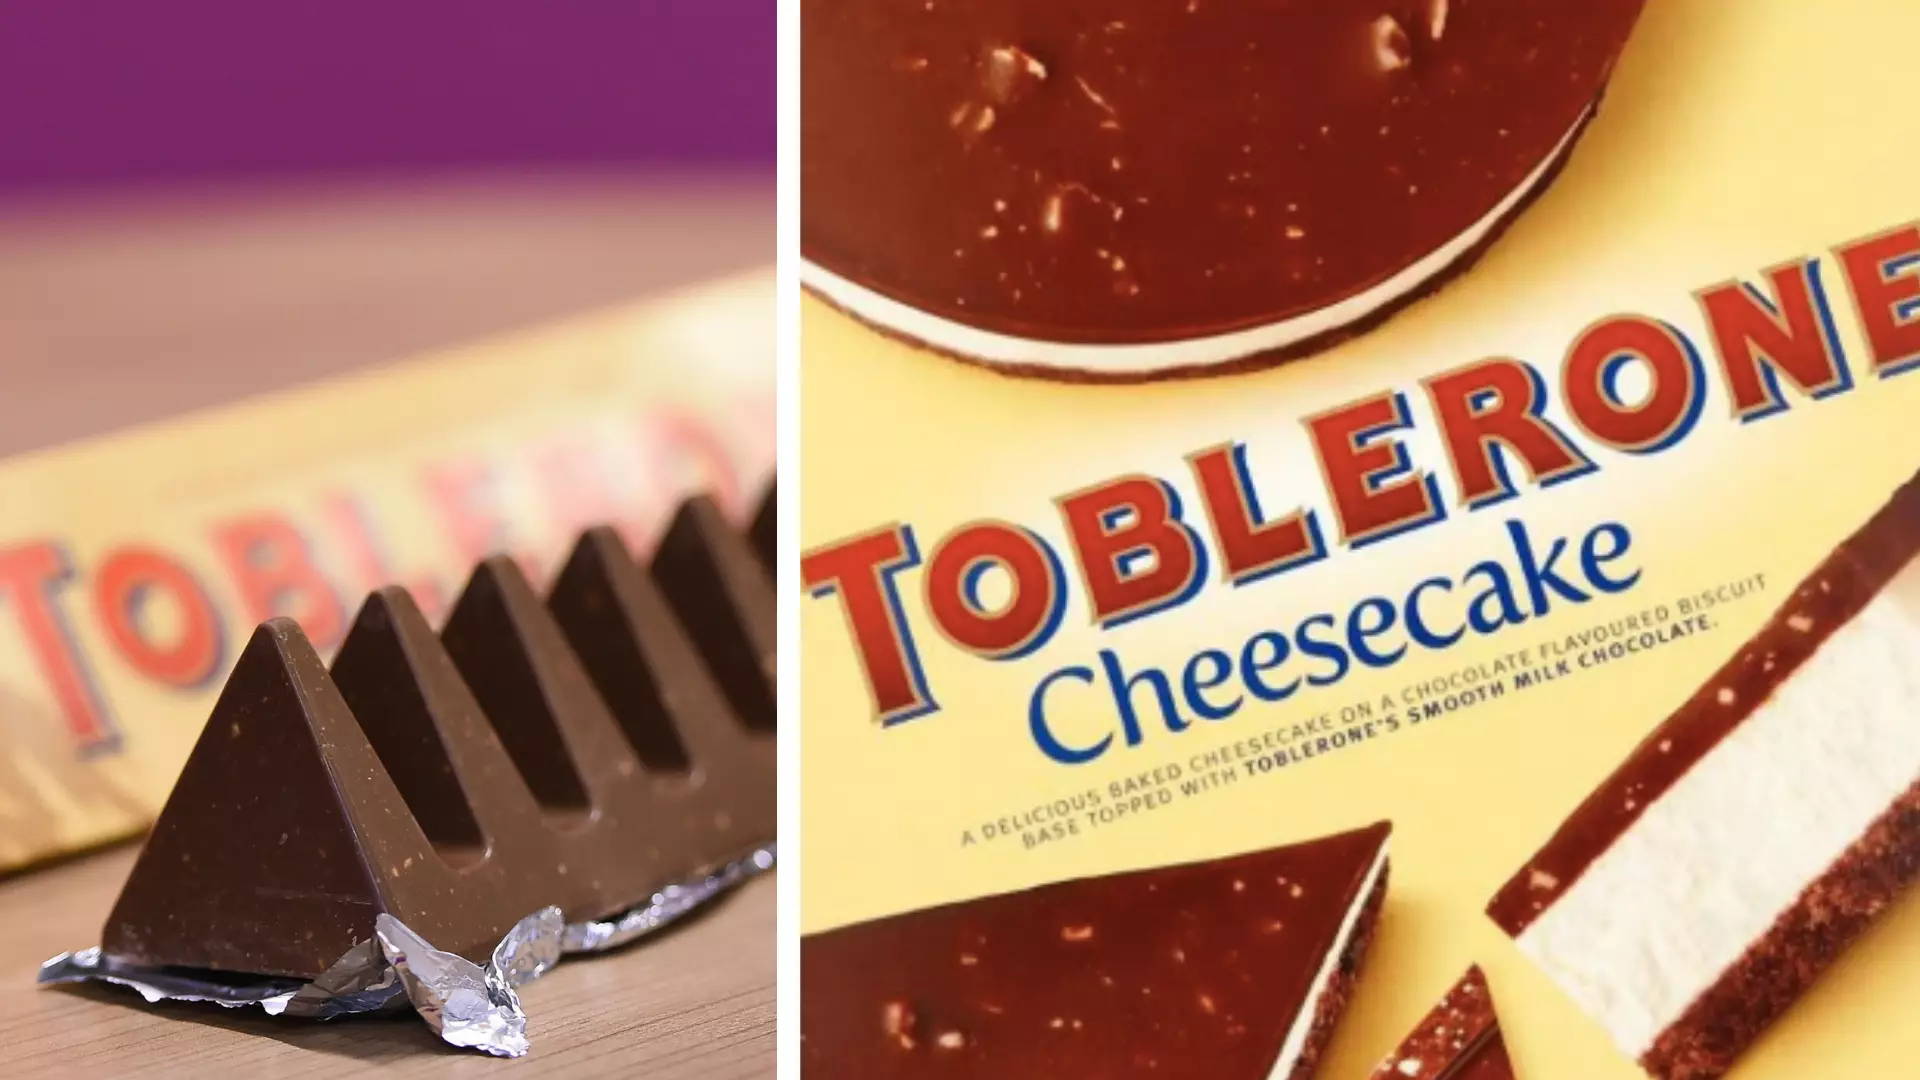 You Can Now Buy A Toblerone Cheesecake And We Need It Immediately